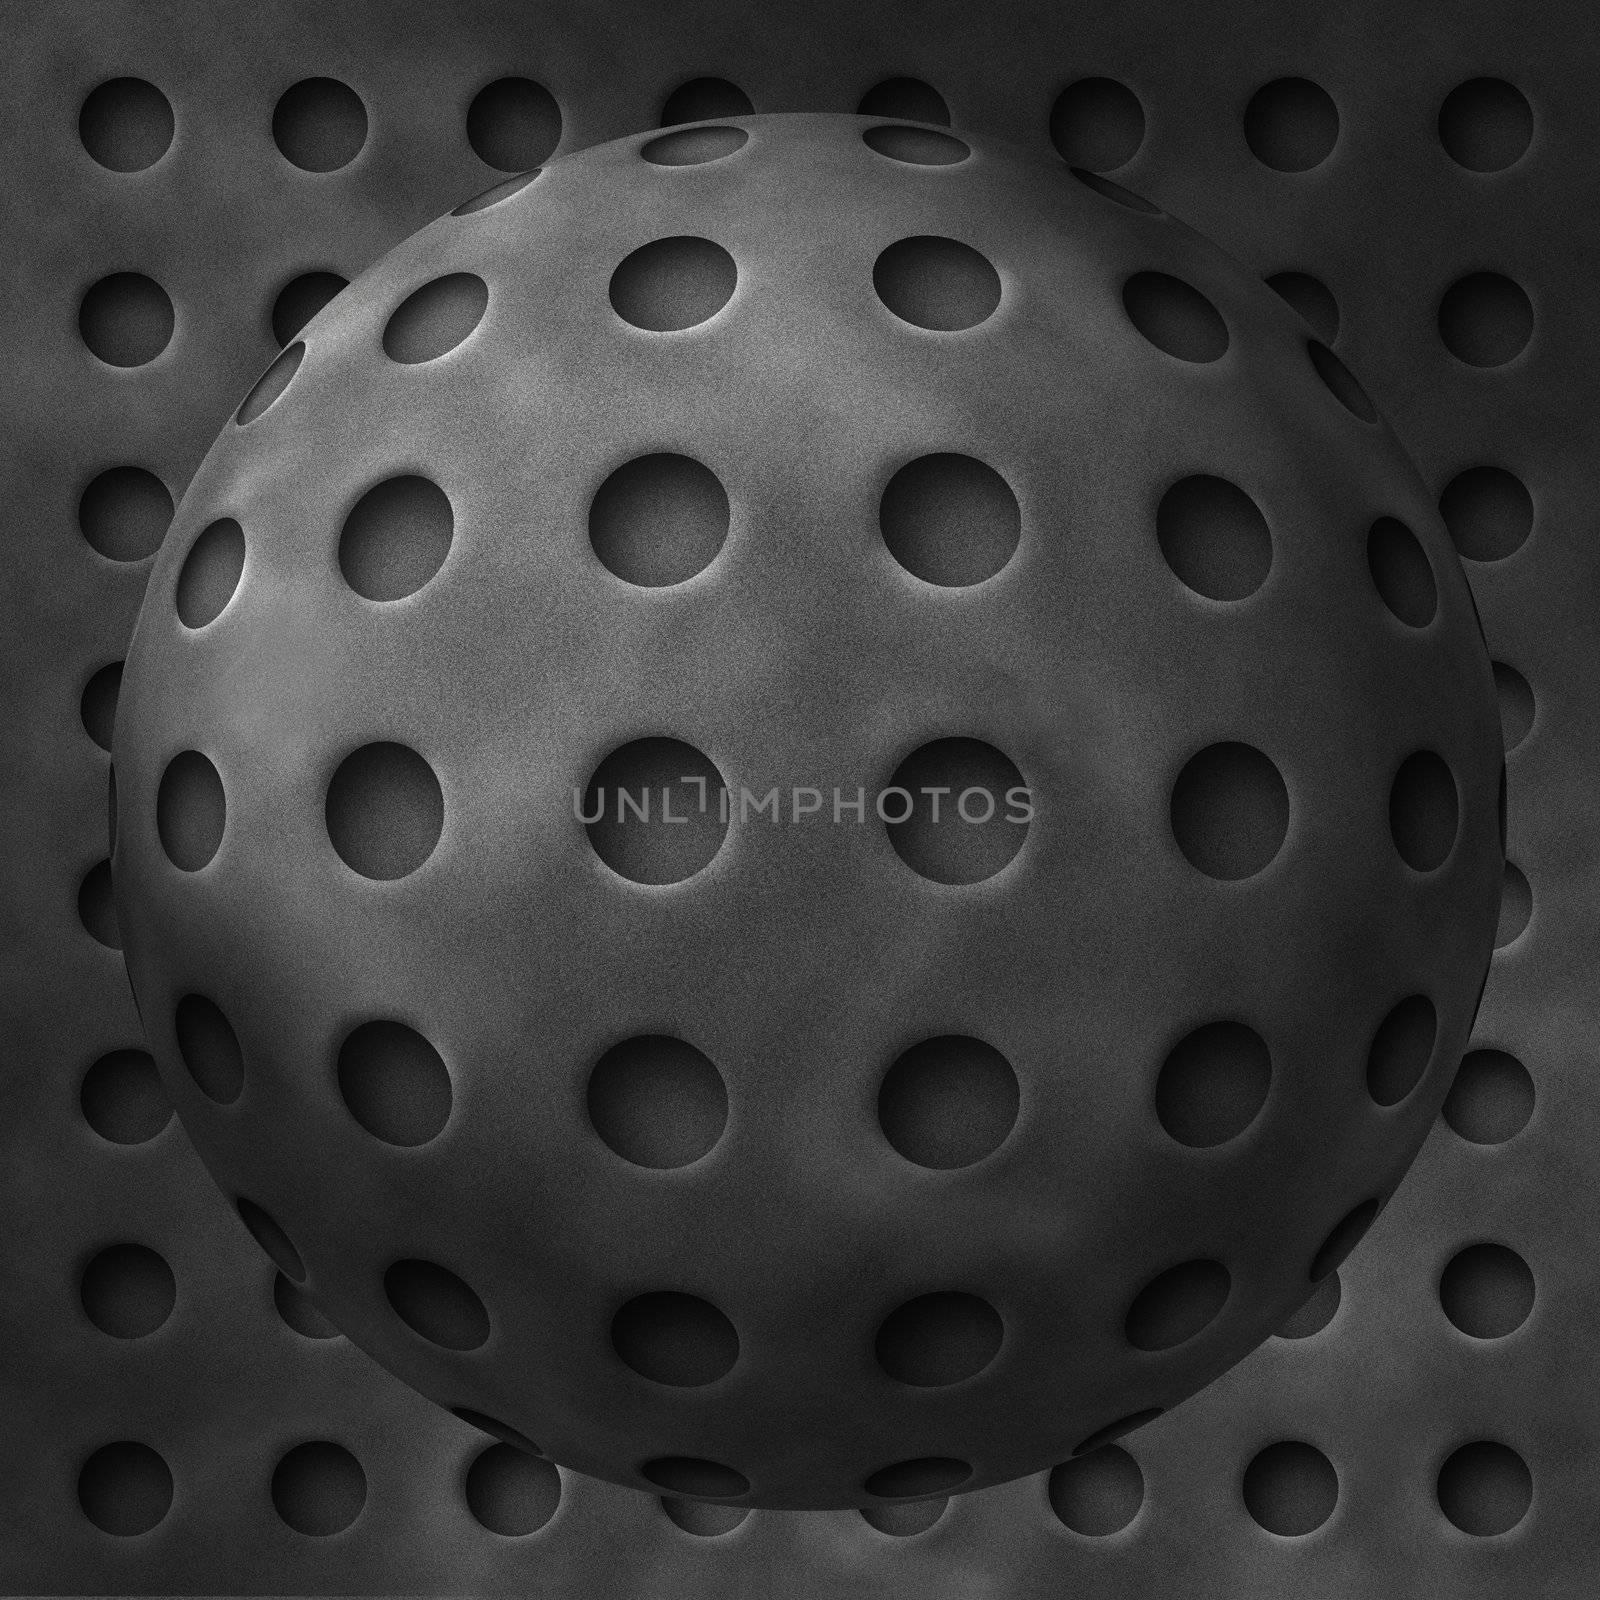 Escher-like black and white illustration of abstract metal balls with holes. Structures resemble iron wiffle balls.